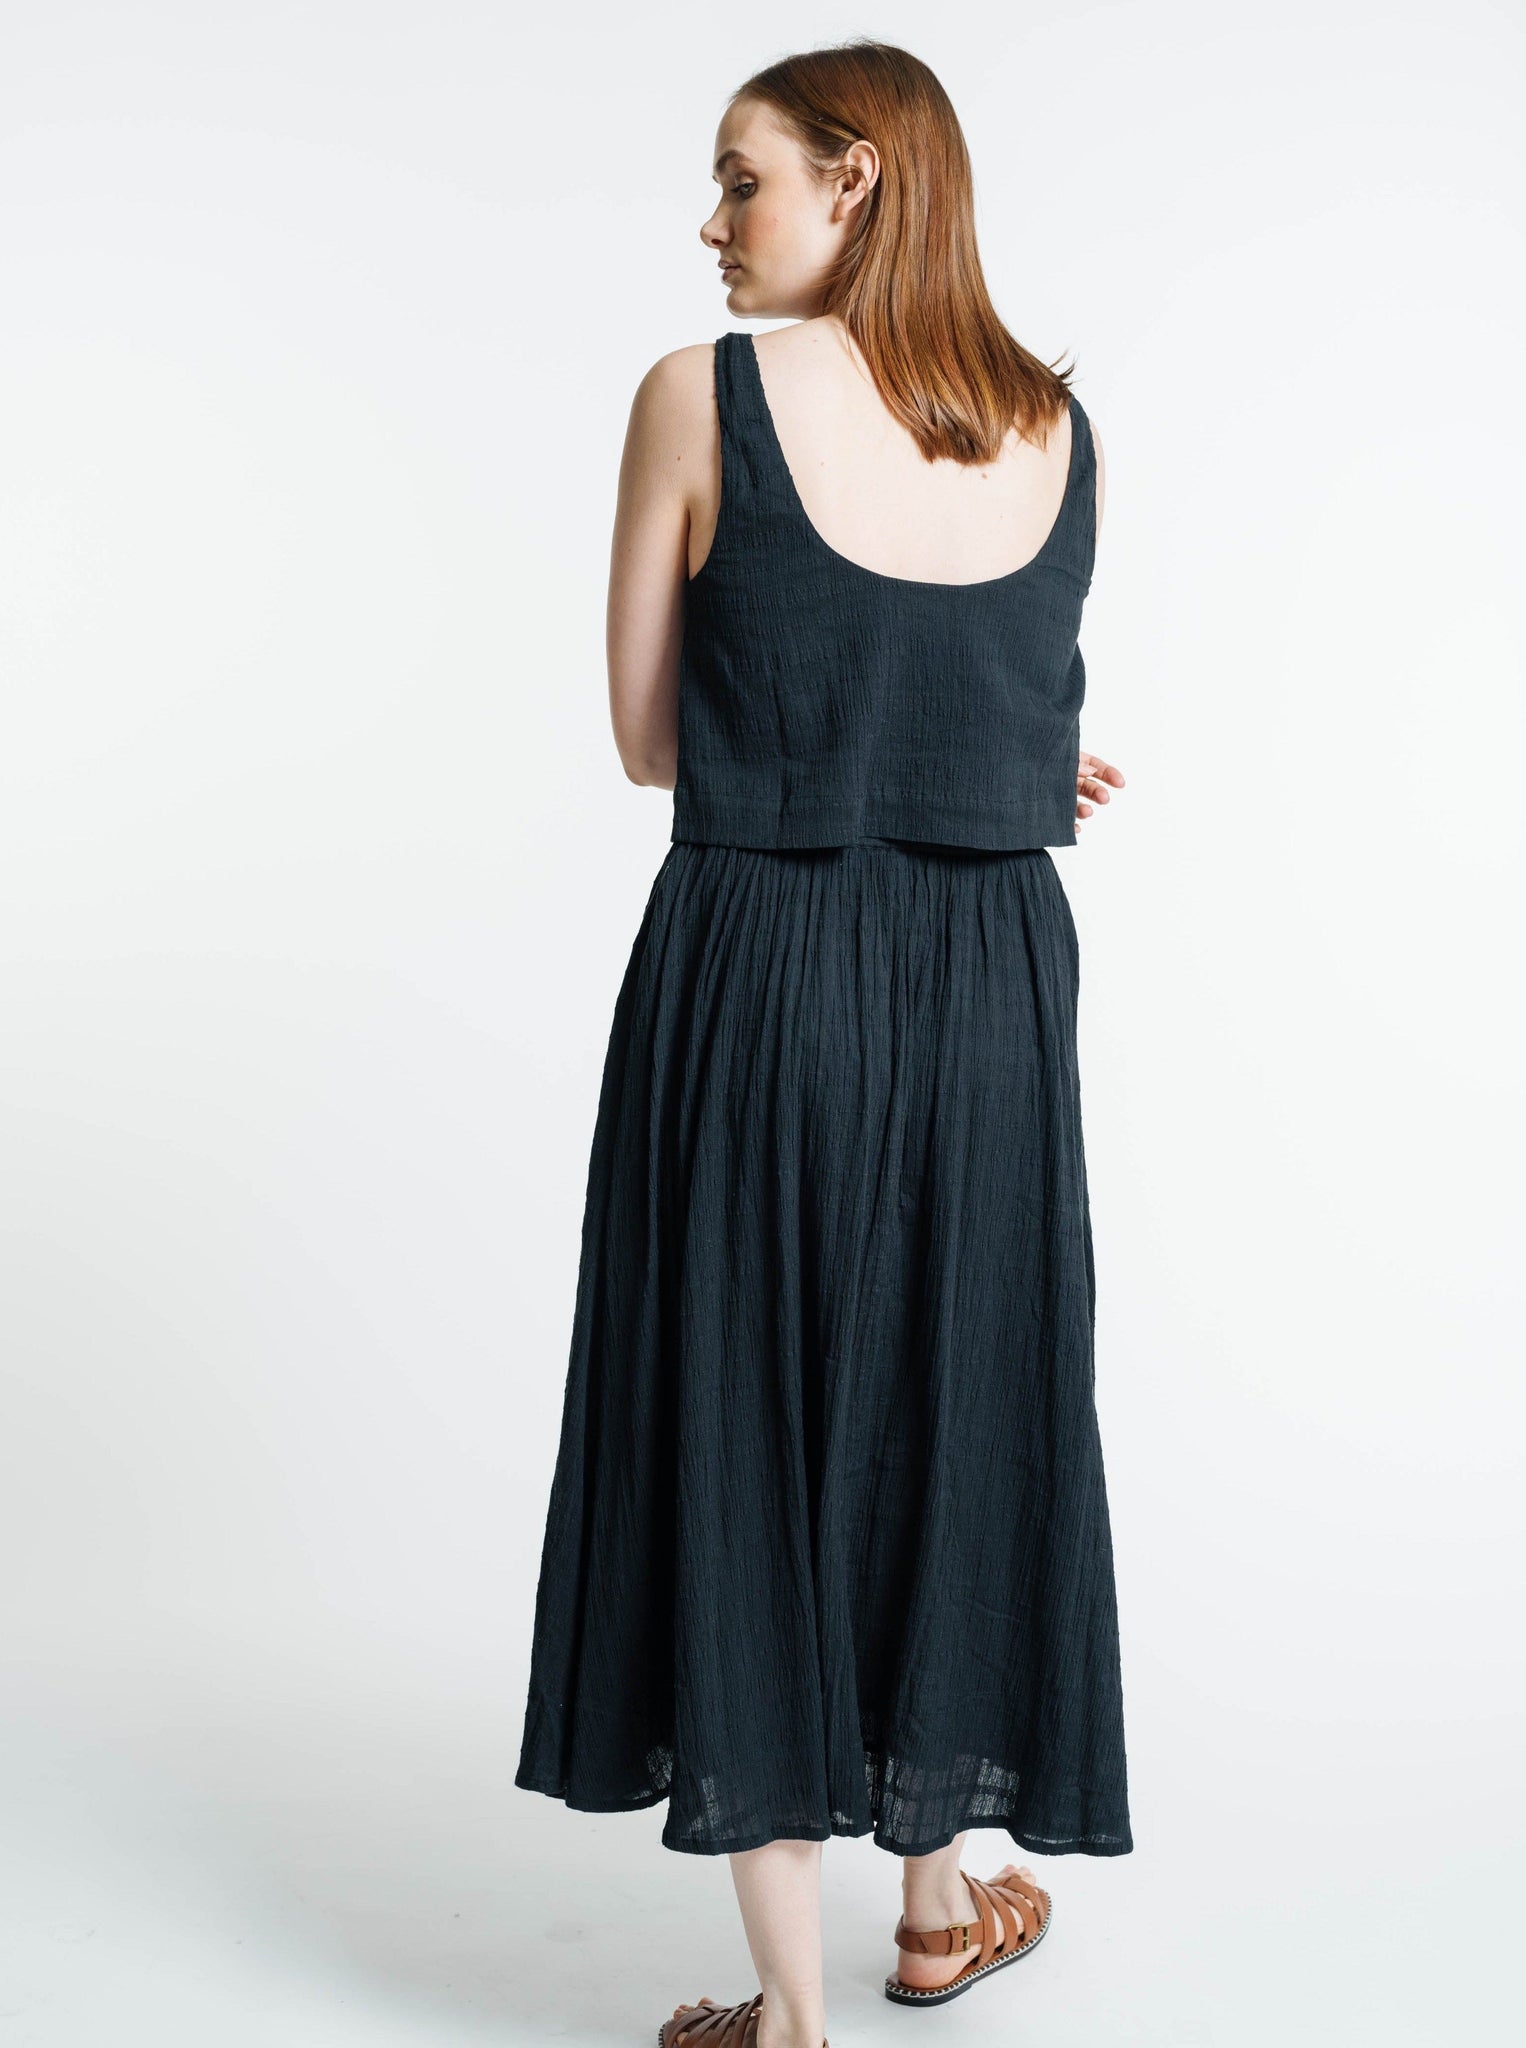 The back view of a woman wearing a Market Tank - Ink Plaid linen dress.